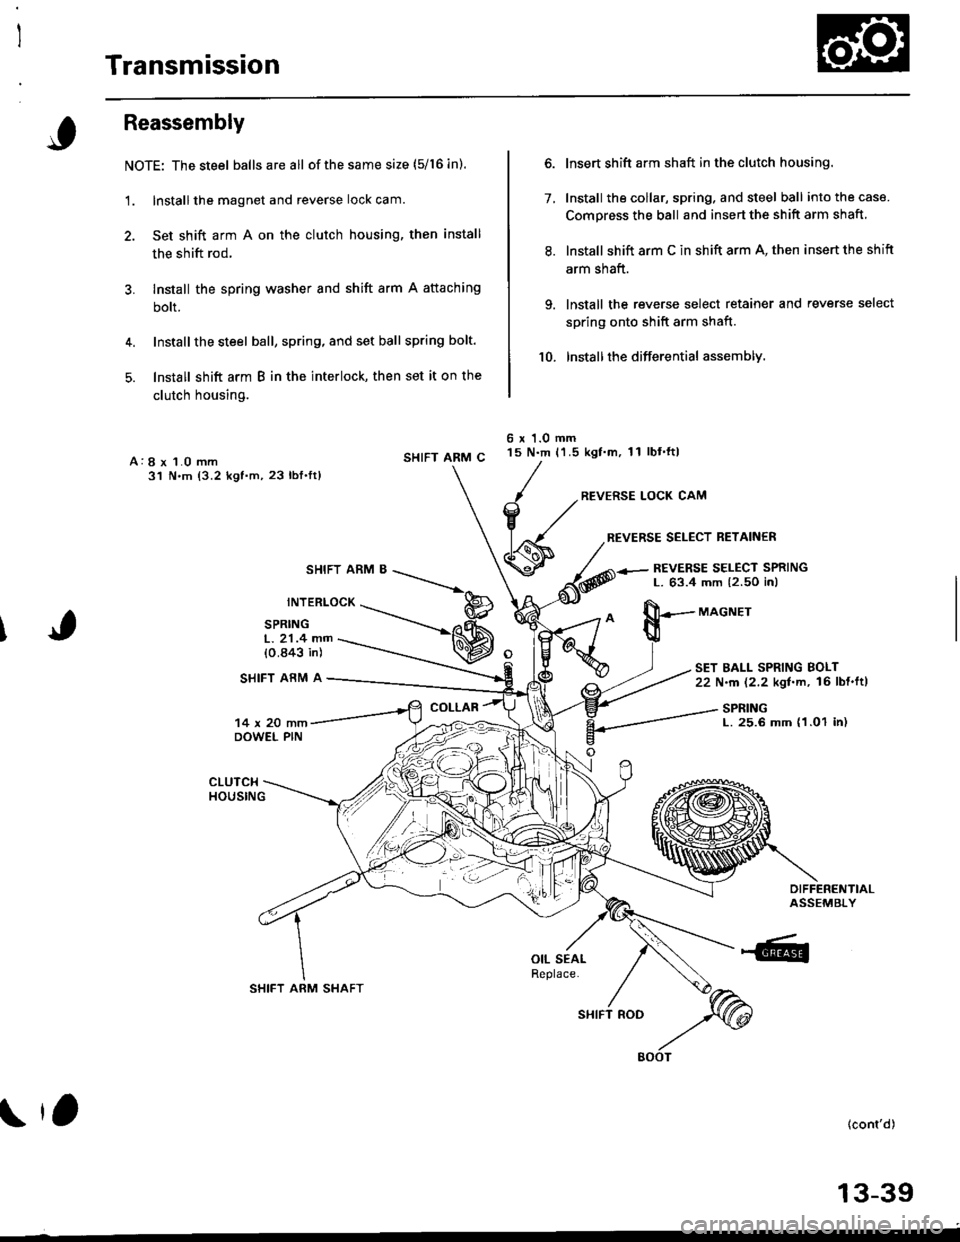 HONDA CIVIC 1996 6.G Workshop Manual Transmission
Reassembly
NOTE: The steel balls are all ofthe same size (5/16 in).
1. Install the magnet and reverse lock cam.
2. Set shift arm A on the clutch housing, then install
the shift rod.
3. In